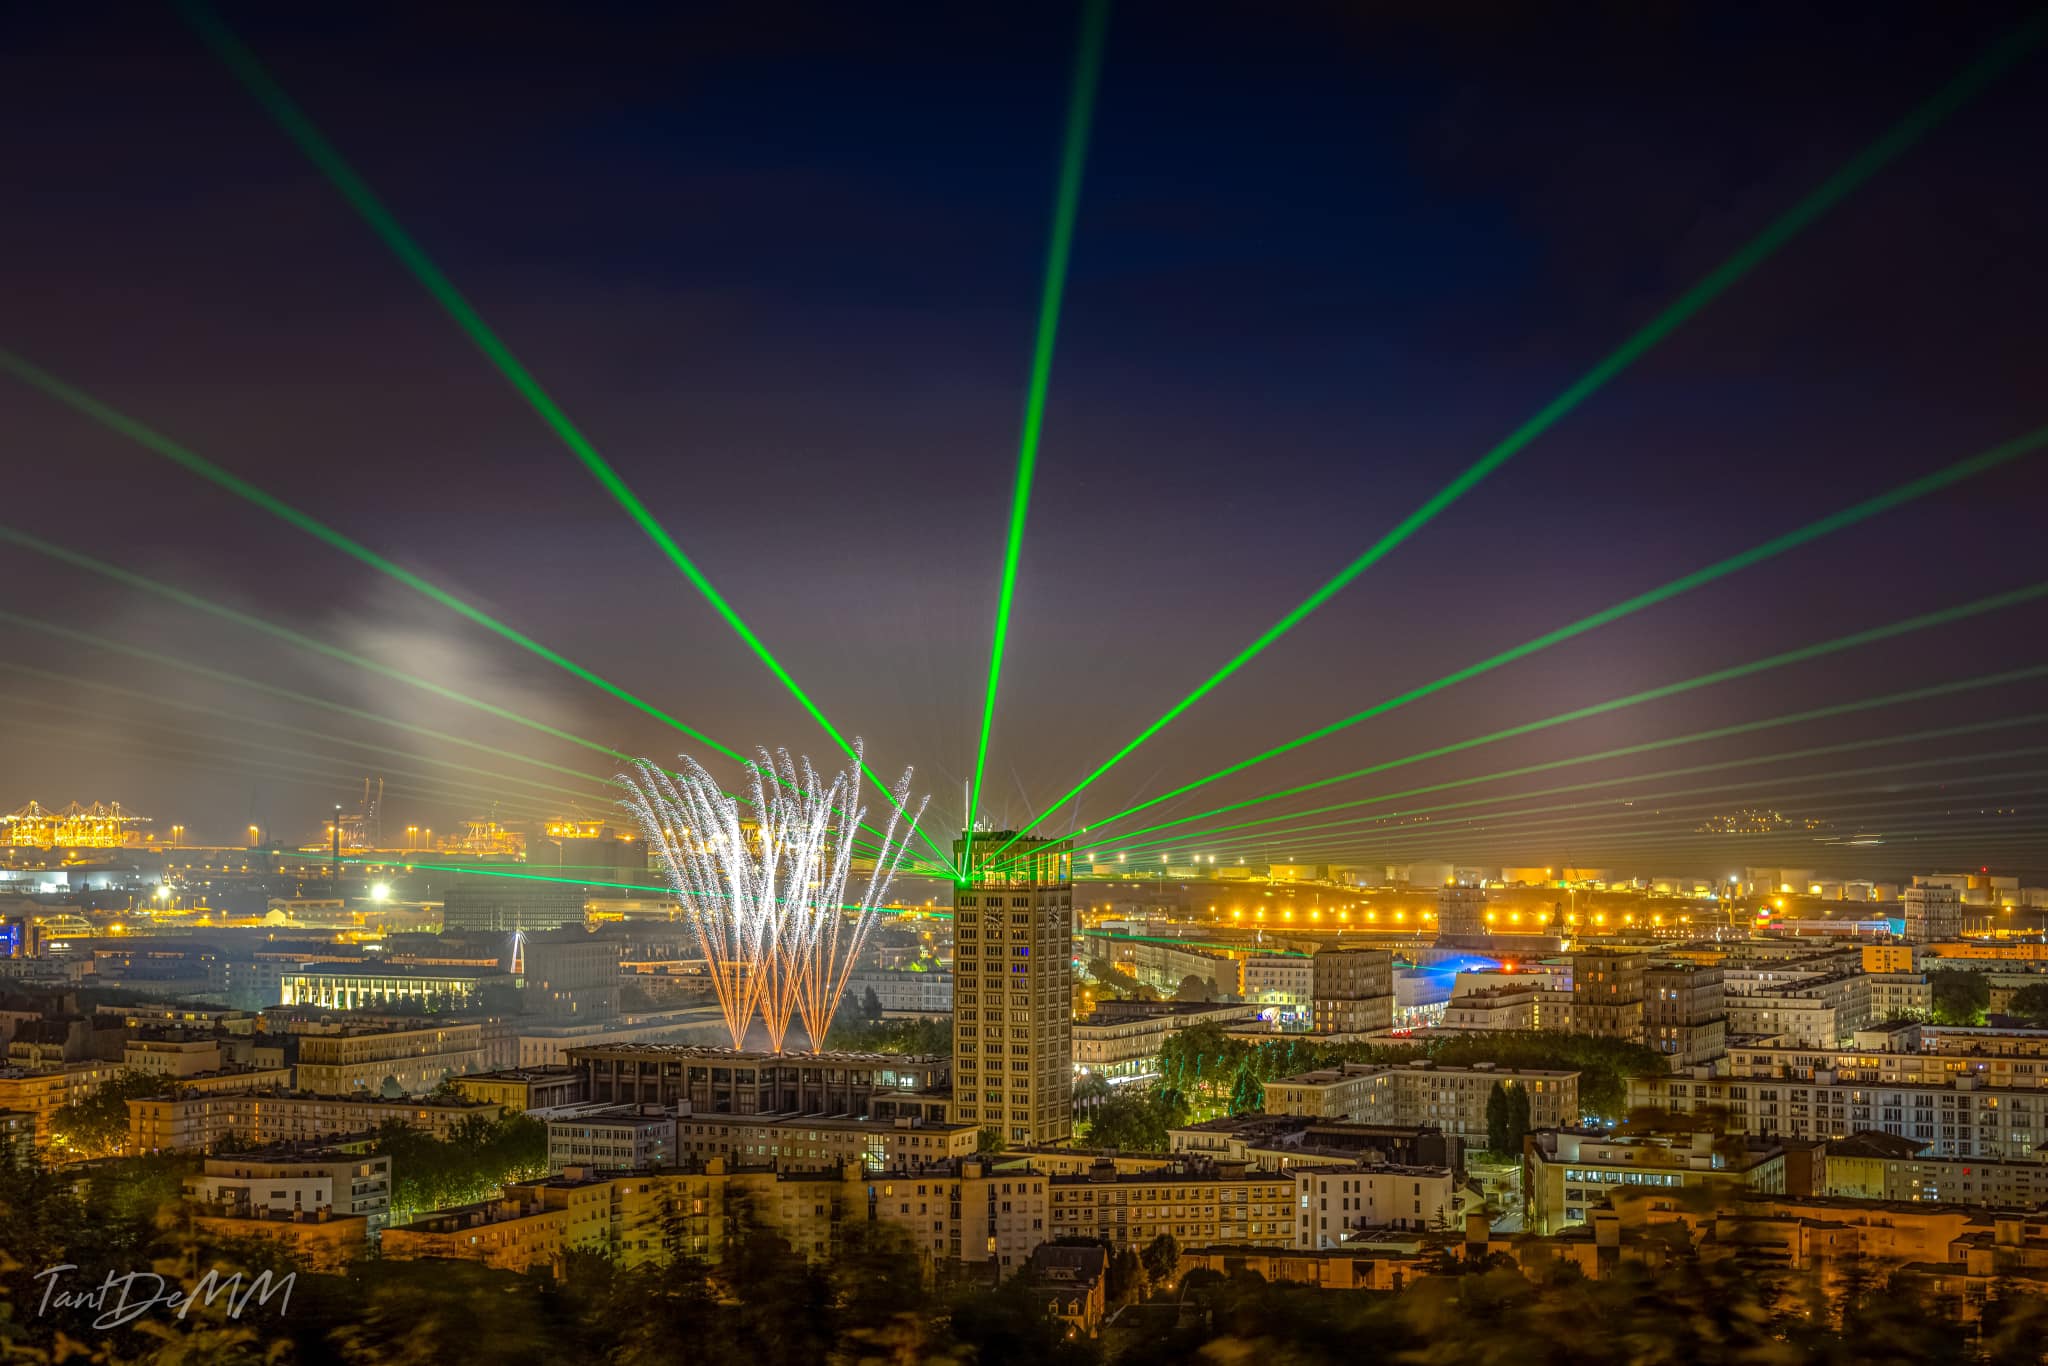 Photo of a town tower with green laser beams projection starting from the tower and accompanied by fireworks